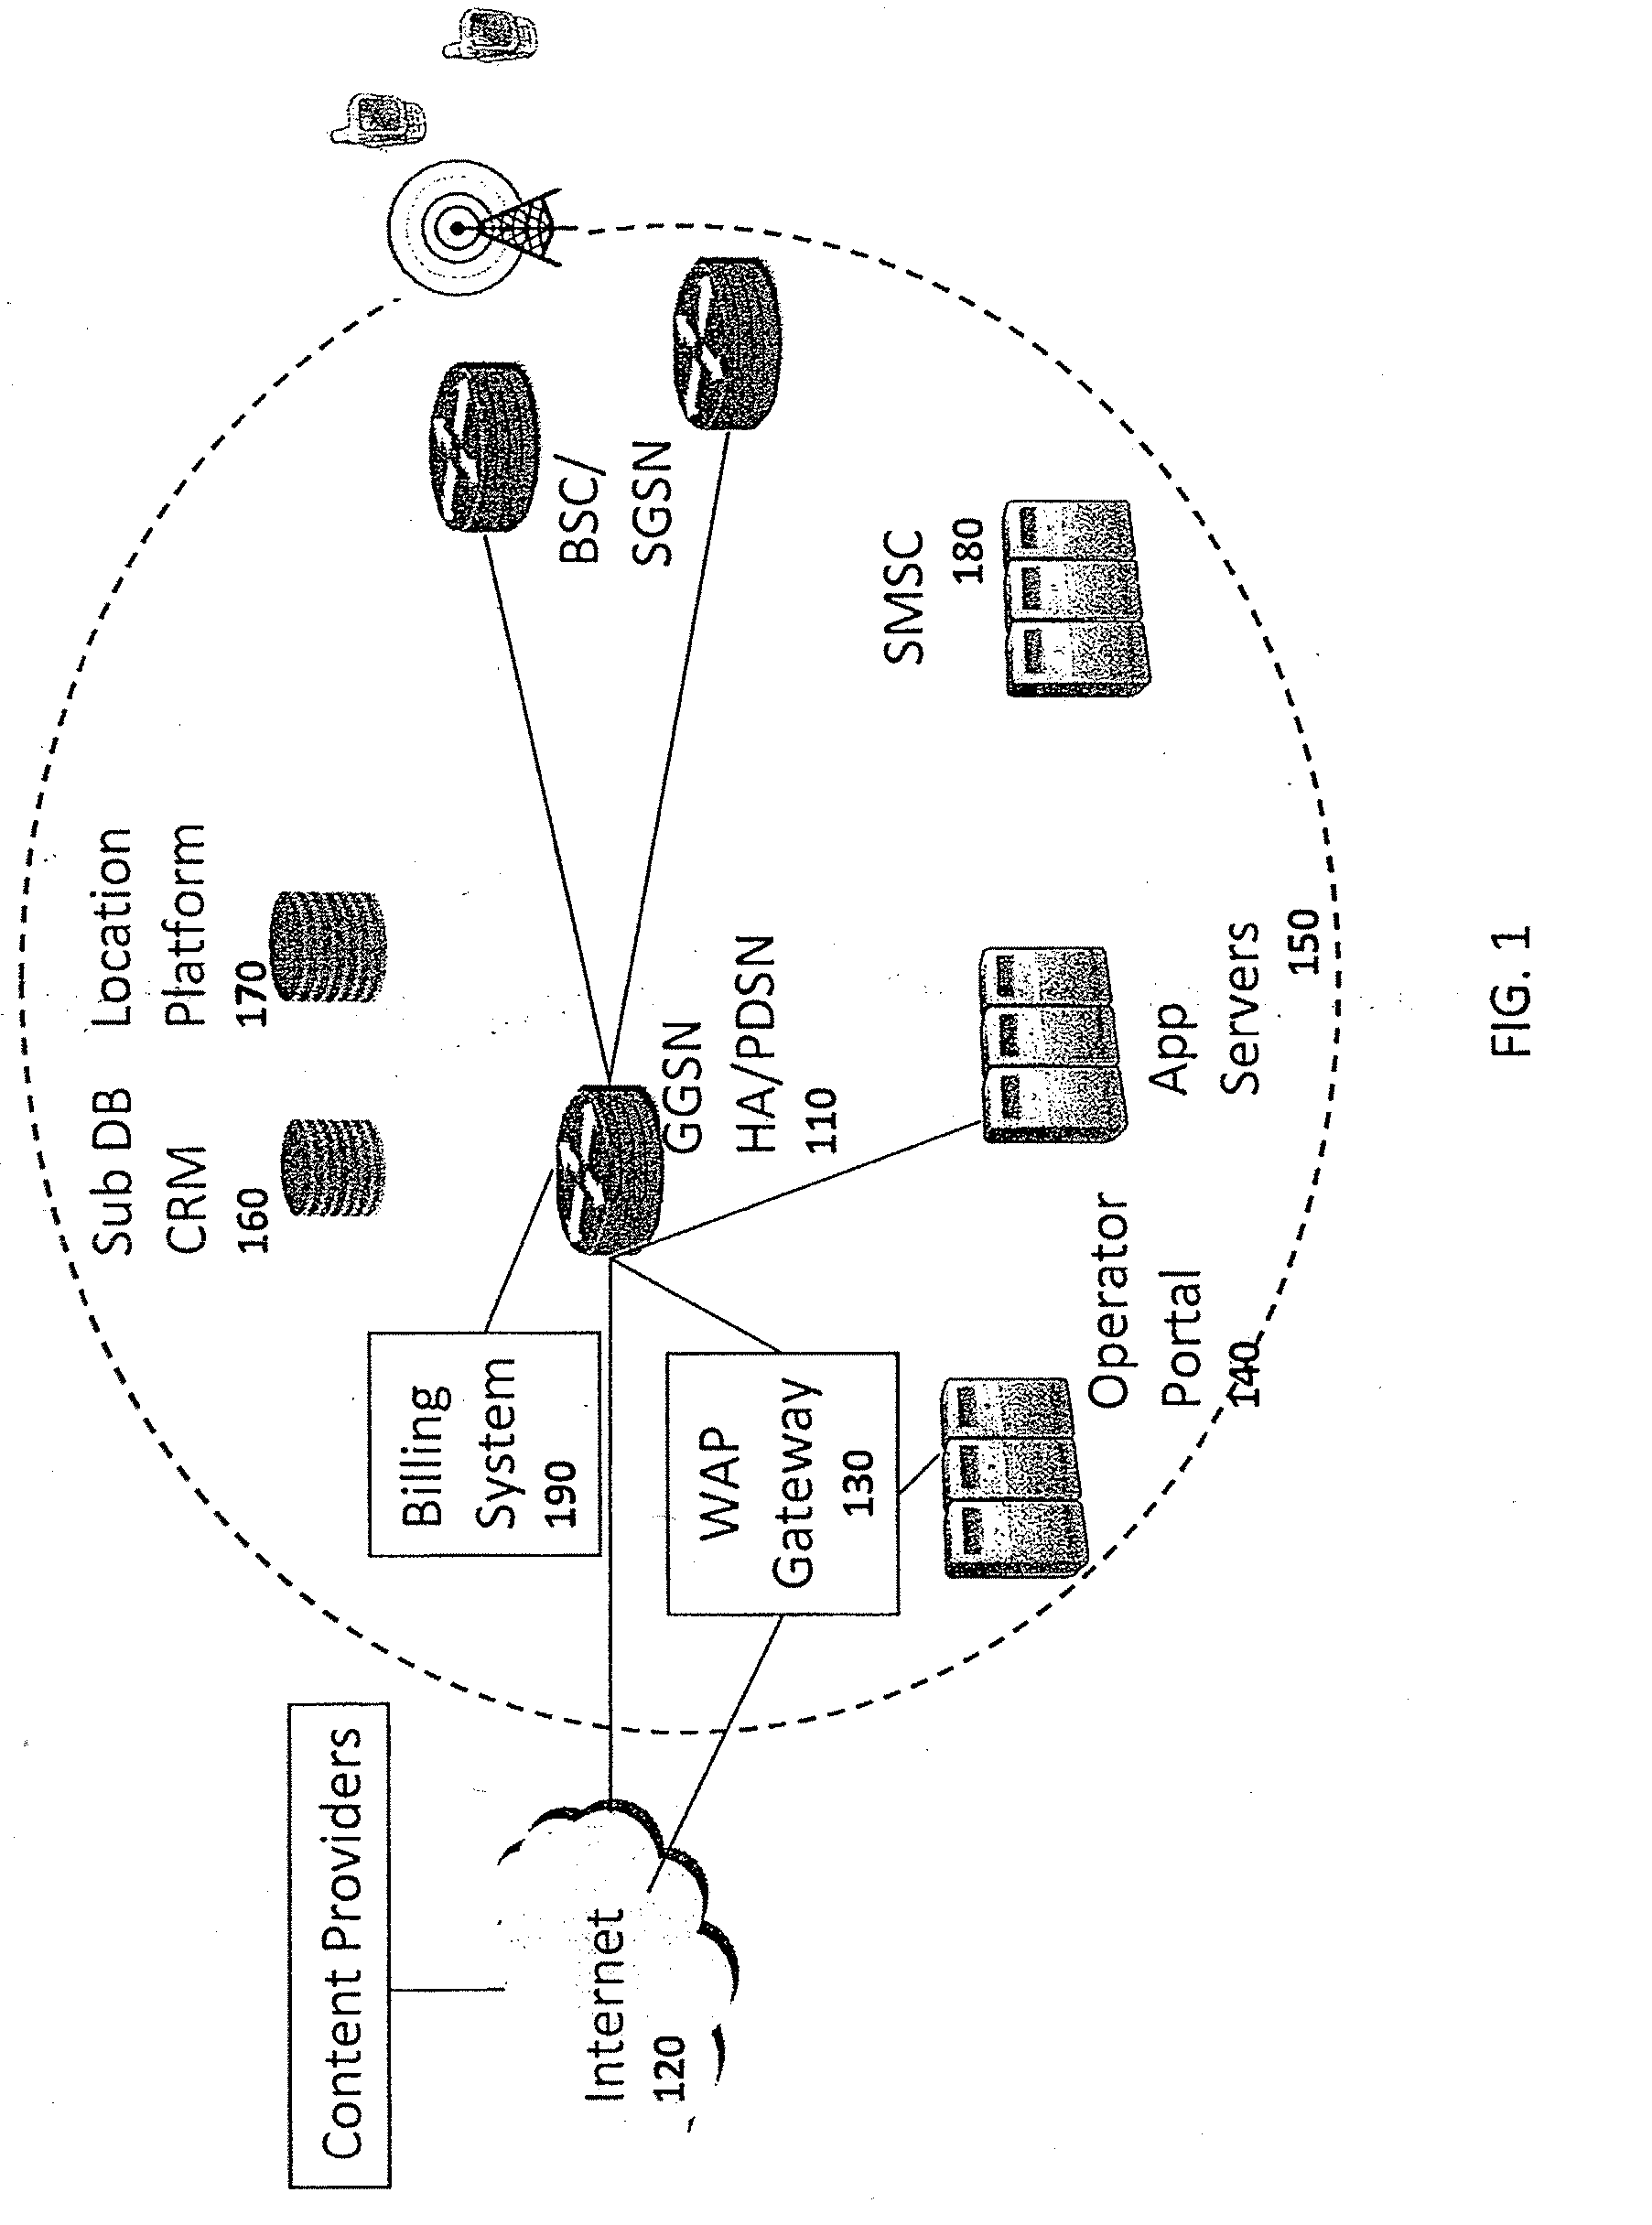 System and method for collecting, reporting and analyzing data on application-level activity and other user information on a mobile data network